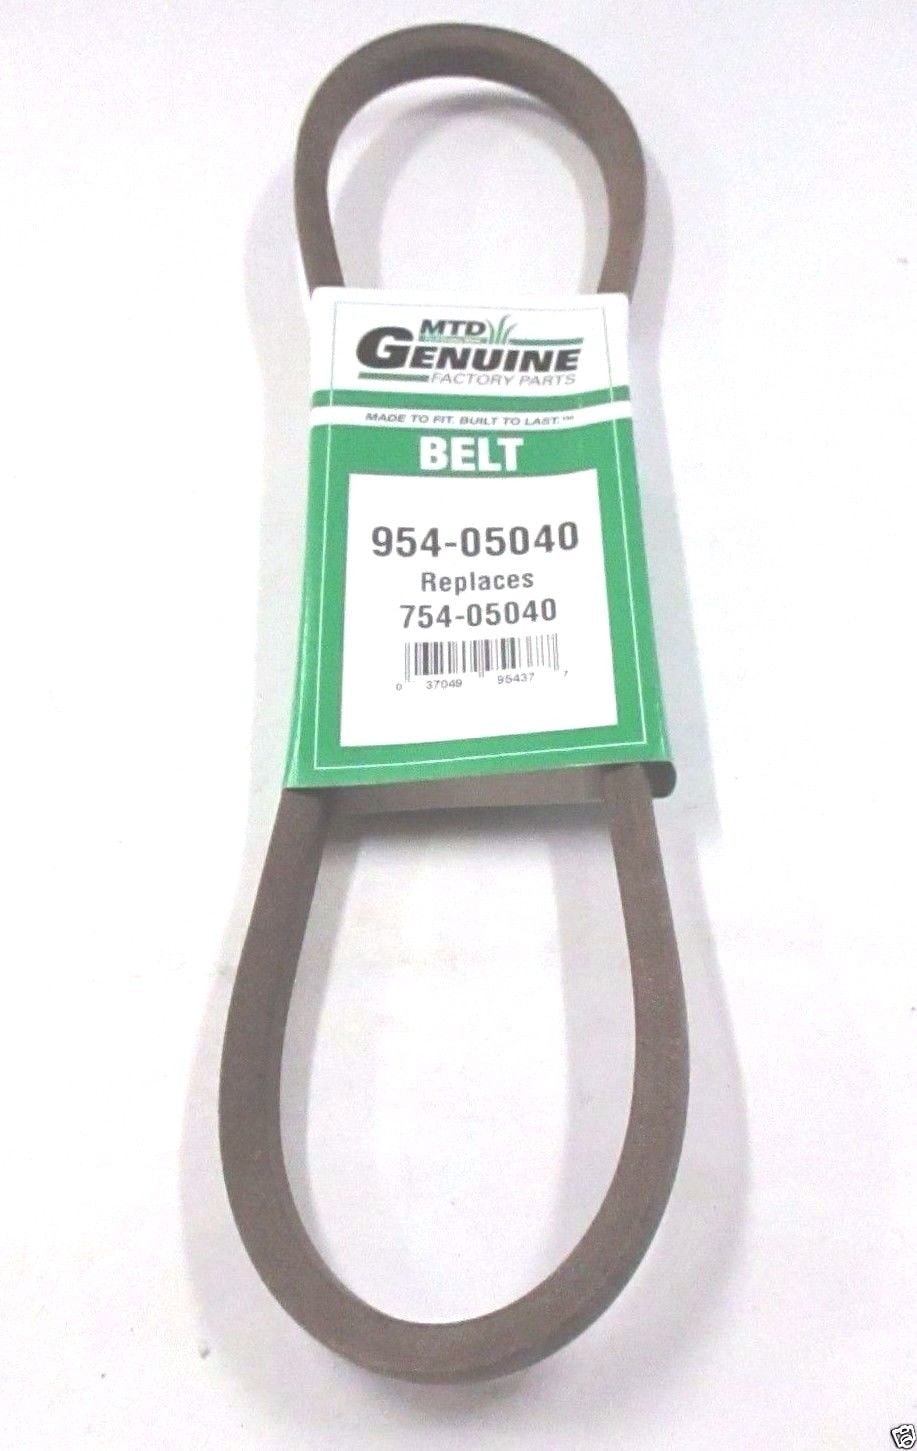 Variable Speed Drive Belts fits MTD 954-04001 954-04001A 954-04002 Lawn Tractor 